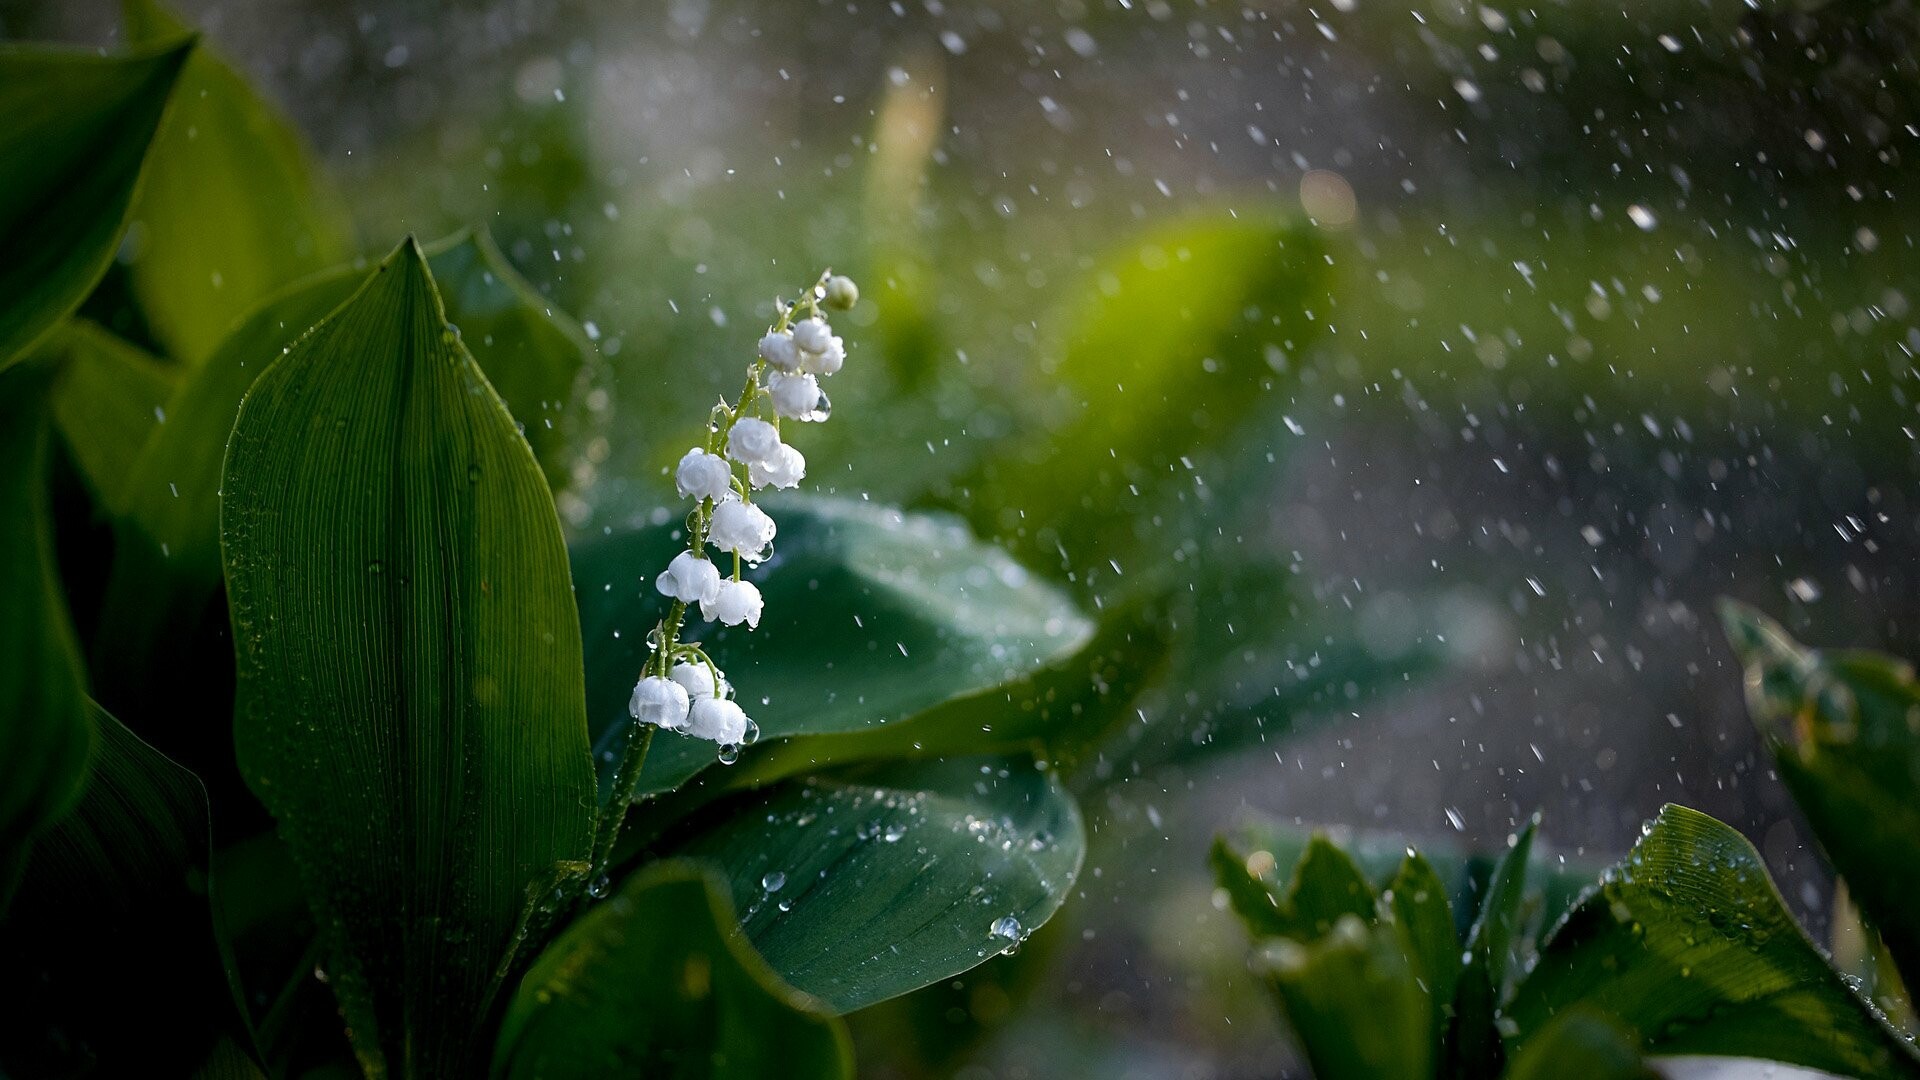 Lily of the Valley: A low-growing, spreading perennial plant, bearing arching stems of bell-shaped, white flowers with a wonderful perfume. 1920x1080 Full HD Background.